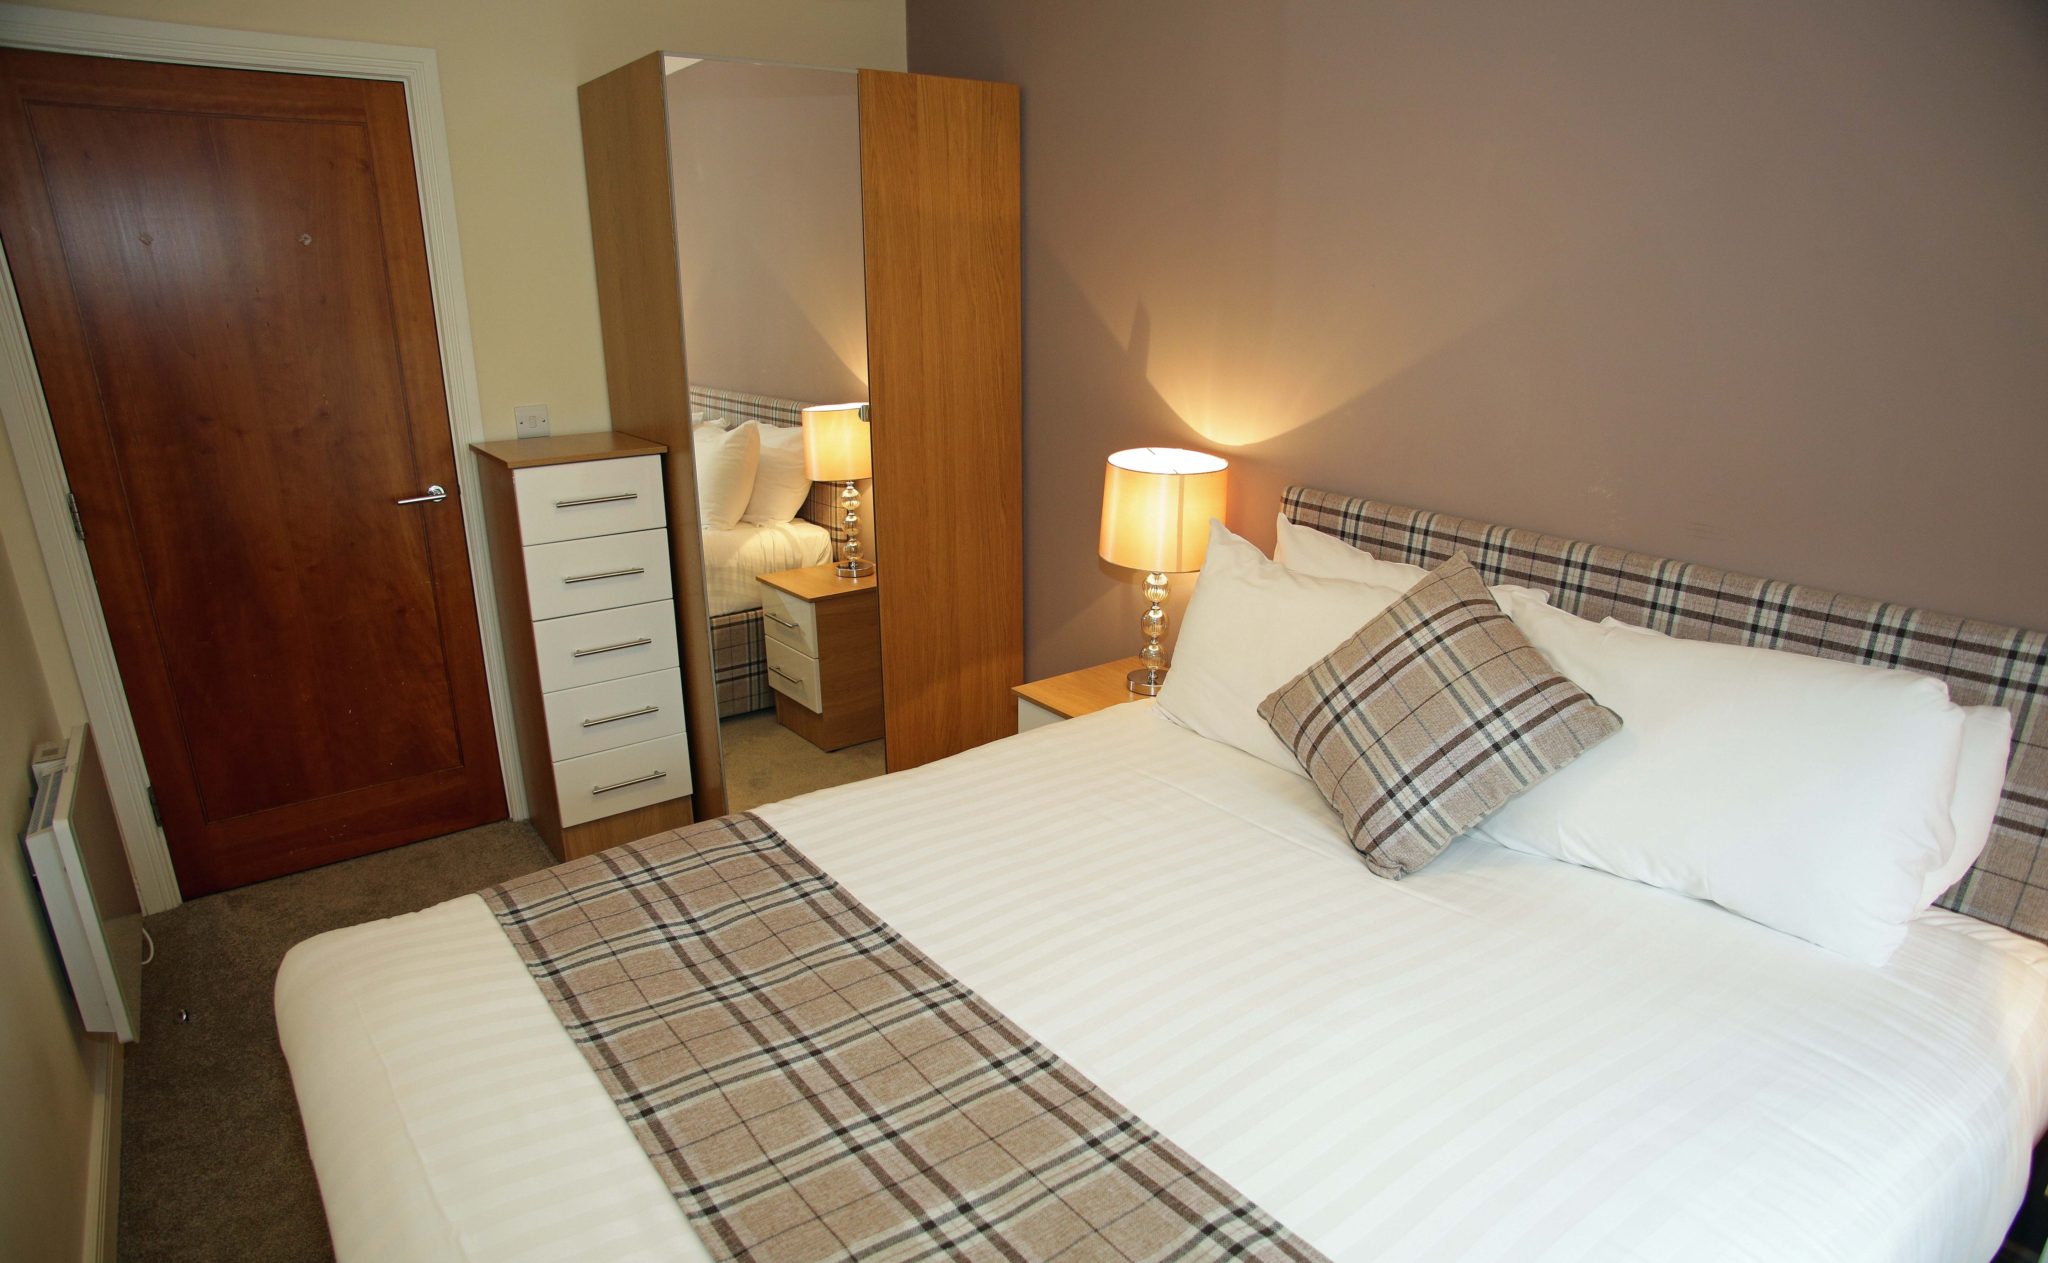 Corporate-Accommodation-Newcastle-UK-available-Now!Book-Serviced-Apartments-in-North-England-today-for-short-lets-&-relocation!-Parking,-Wifi,All-bills-incl-|-Urban-Stay